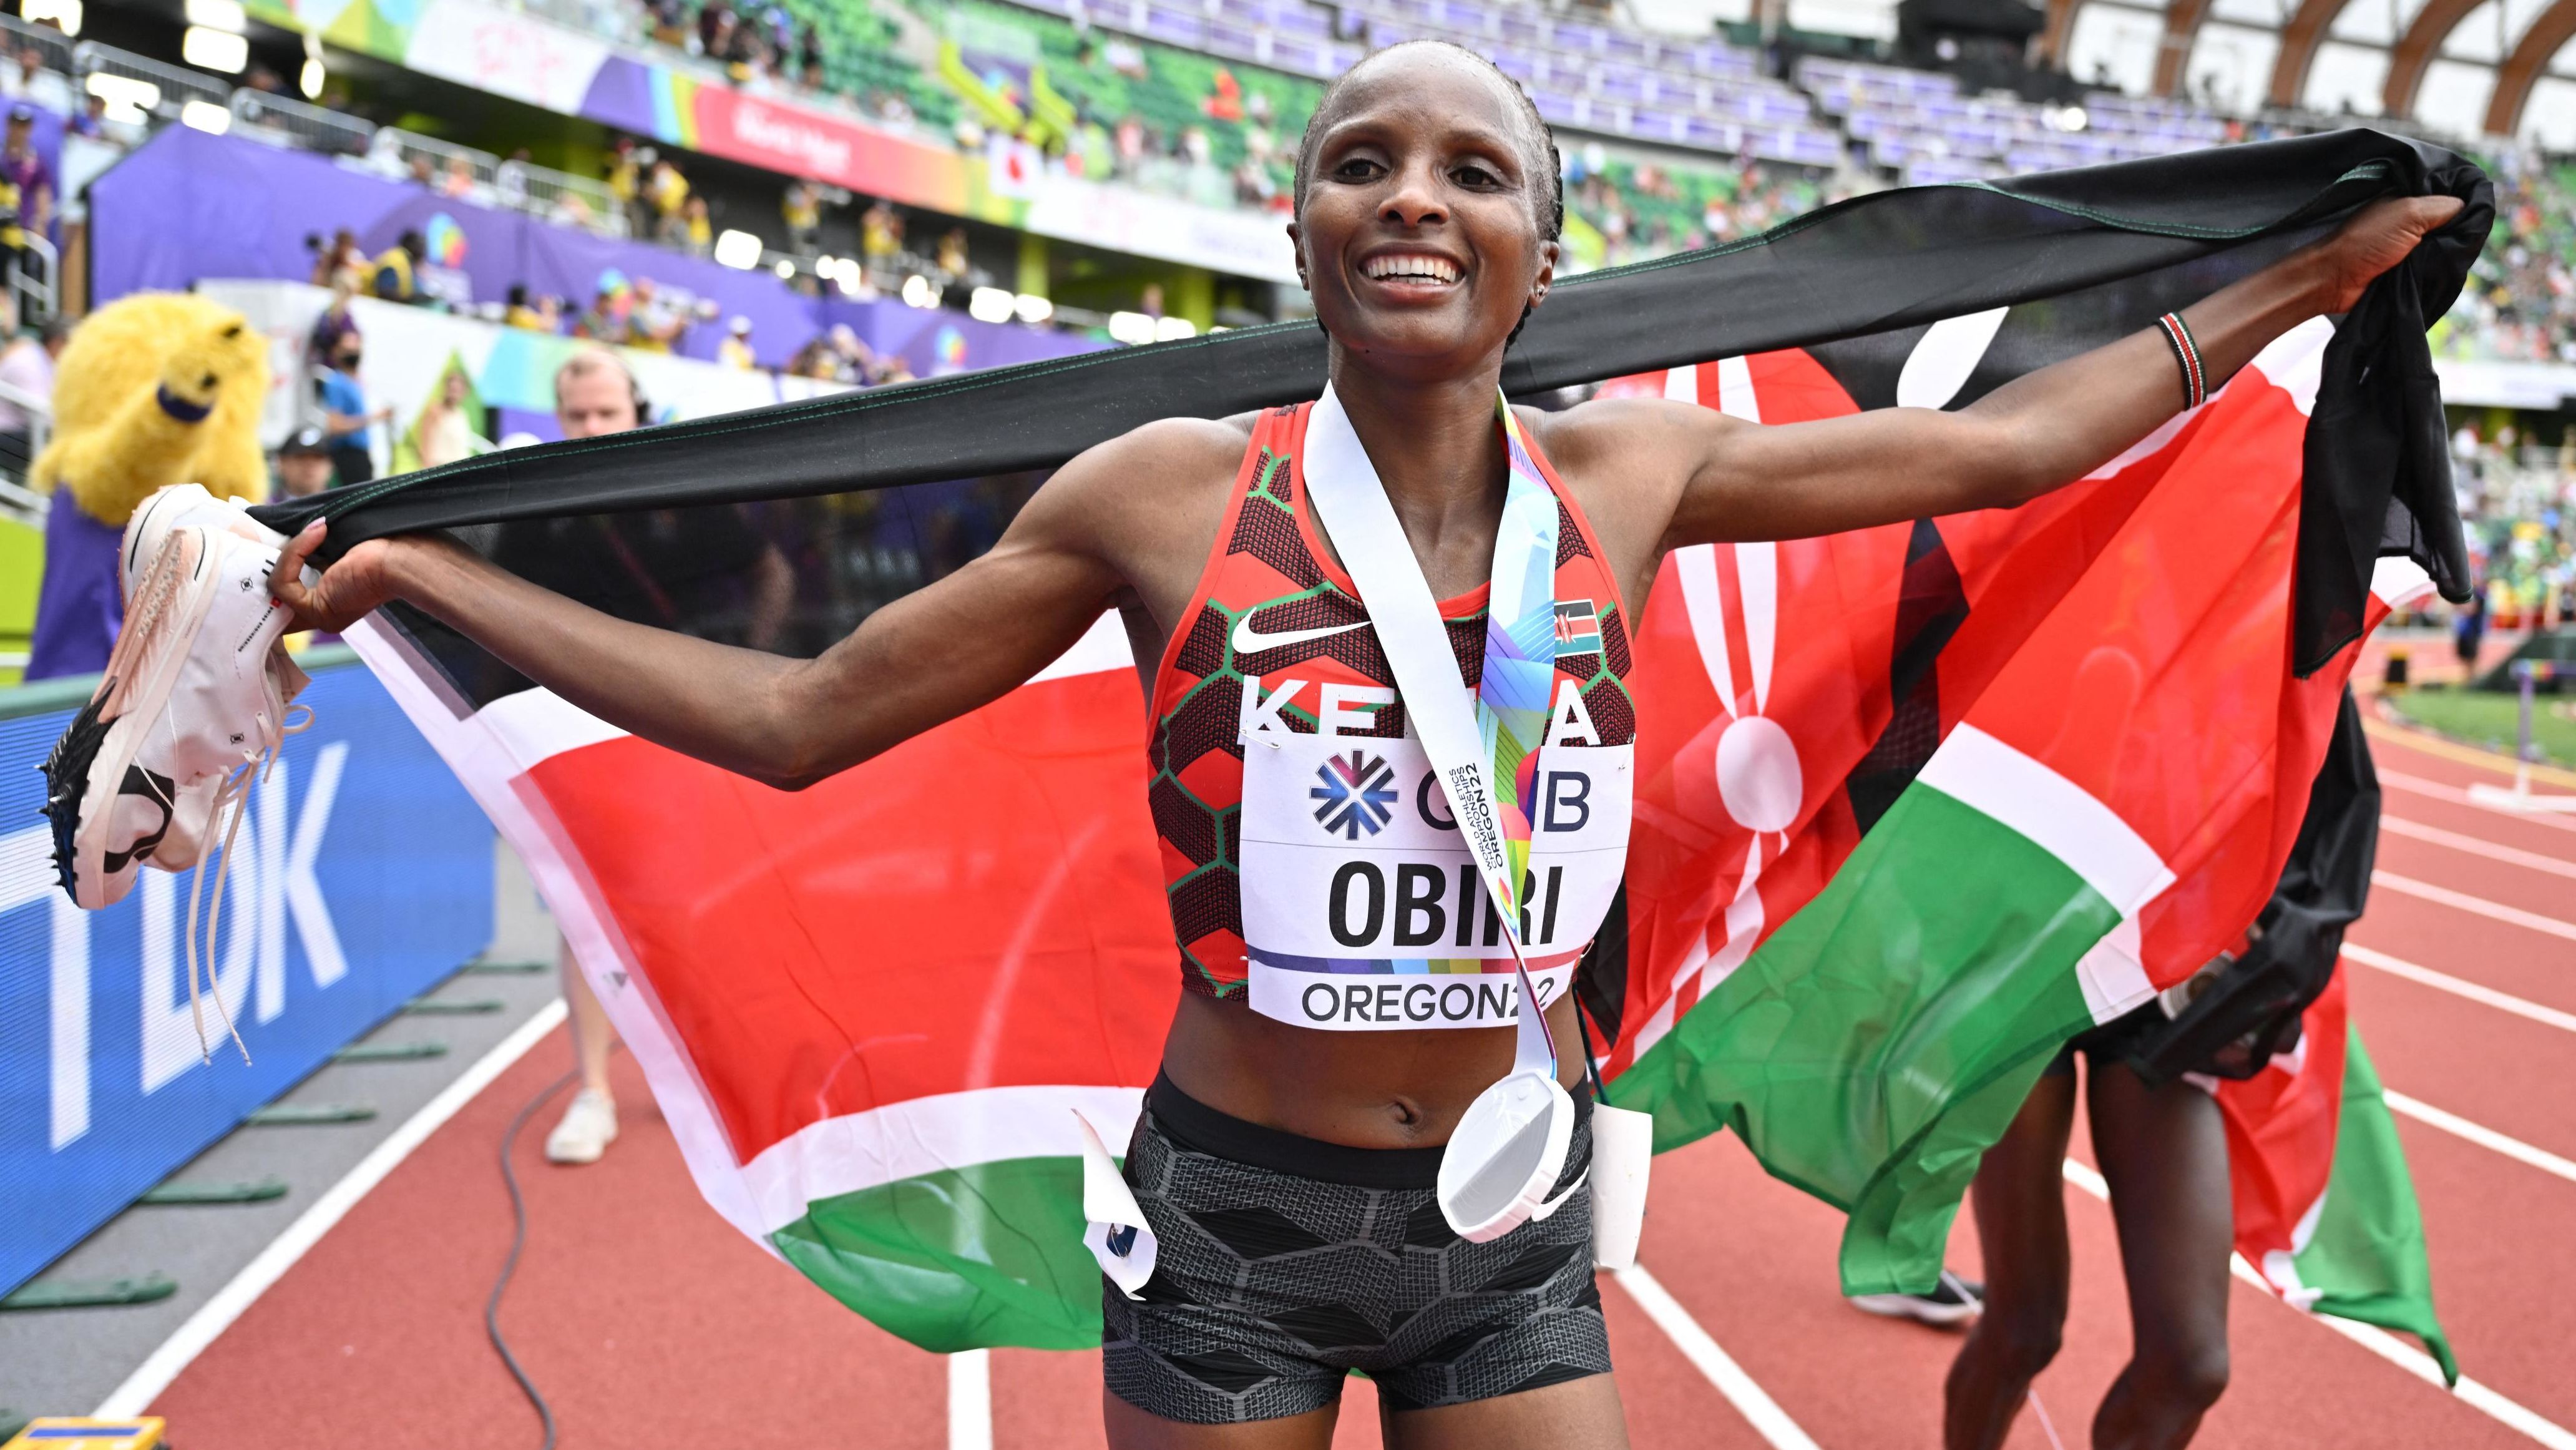 Obiri won a silver medal in the 10,000 meters at last month's World Athletics Championships in Oregon.